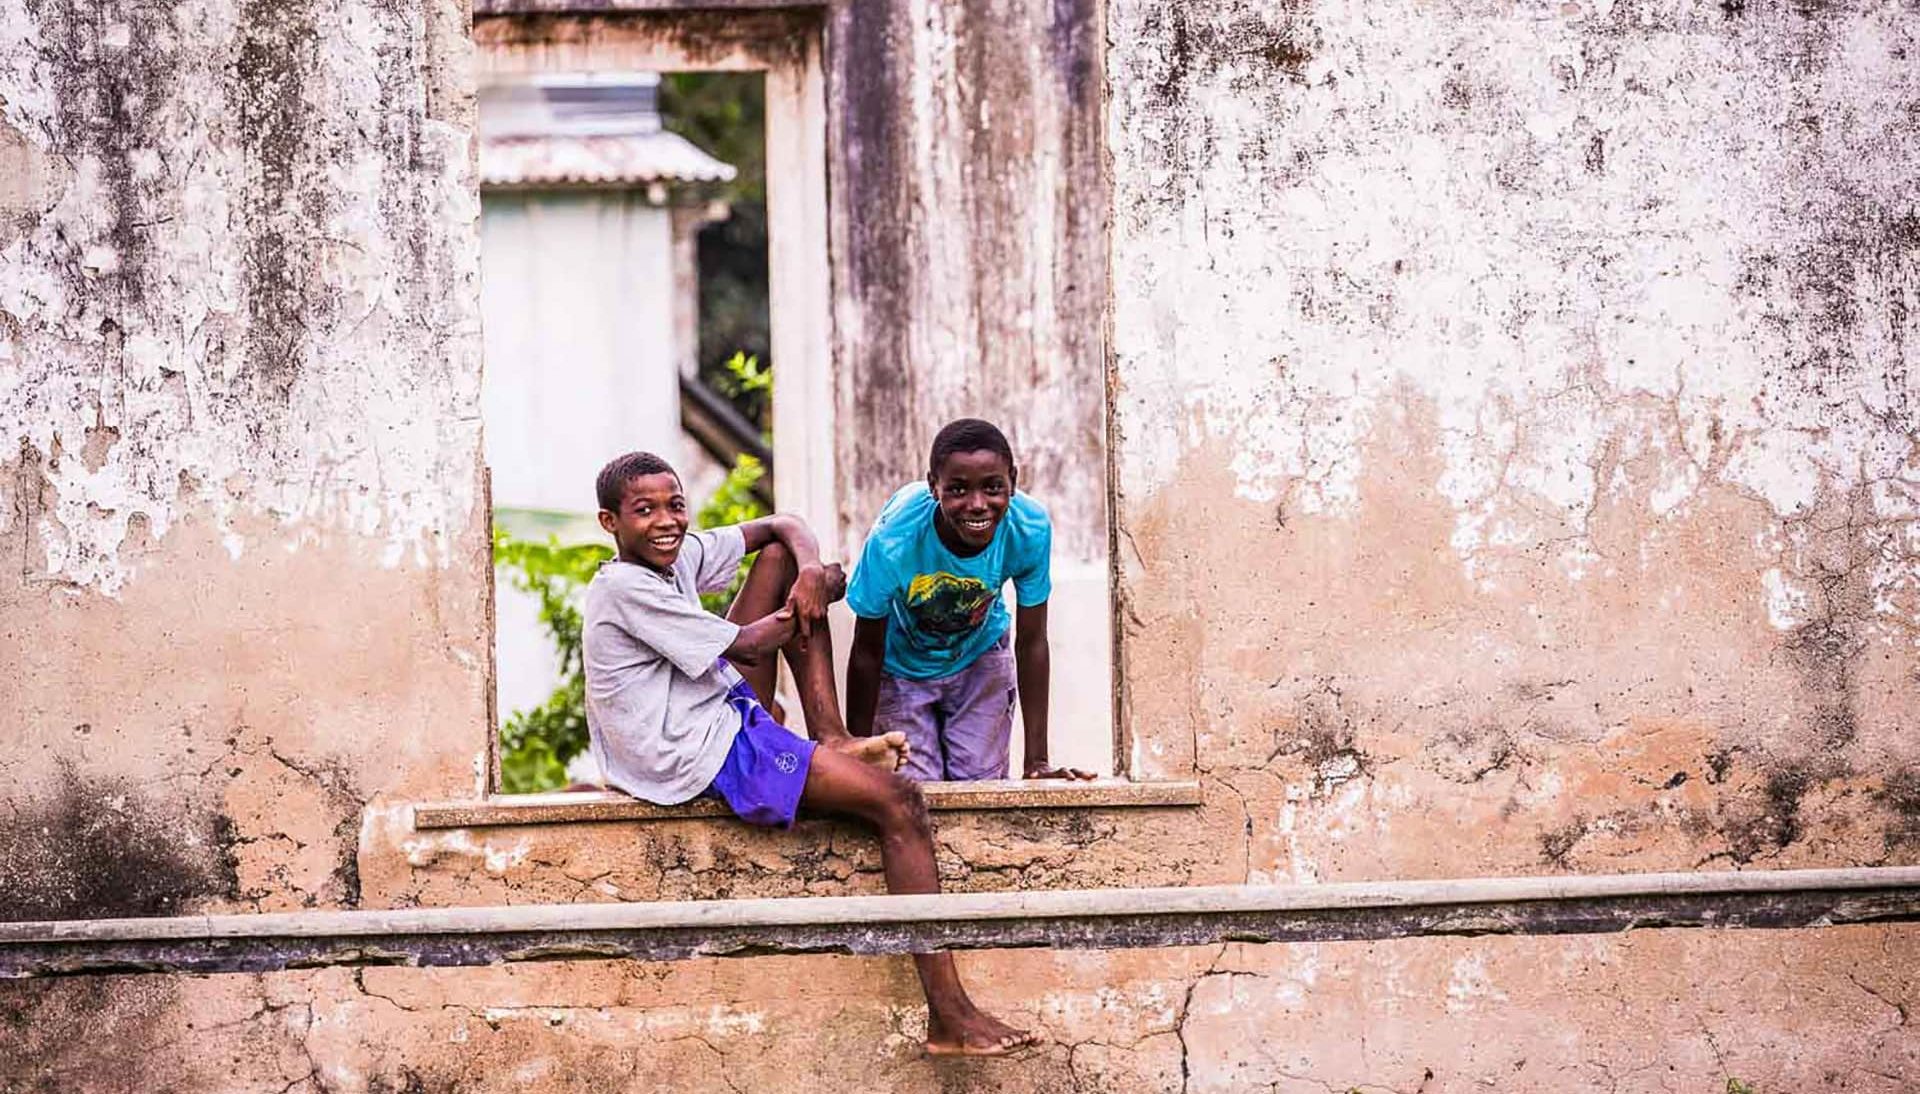 Principe-Island-local-boys-relaxing-in-old-ruins-african-luxury